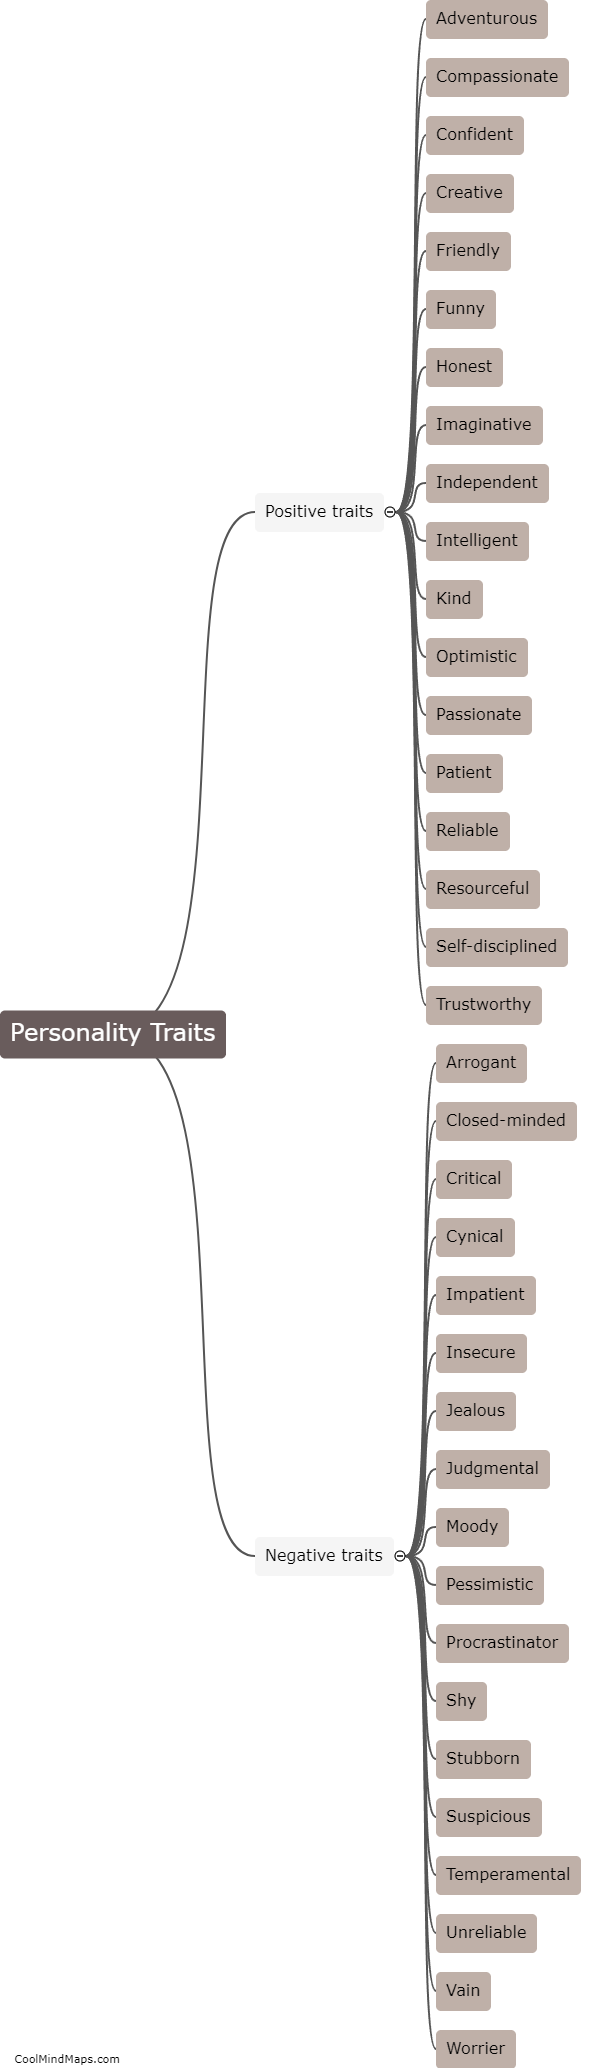 What are my personality traits?